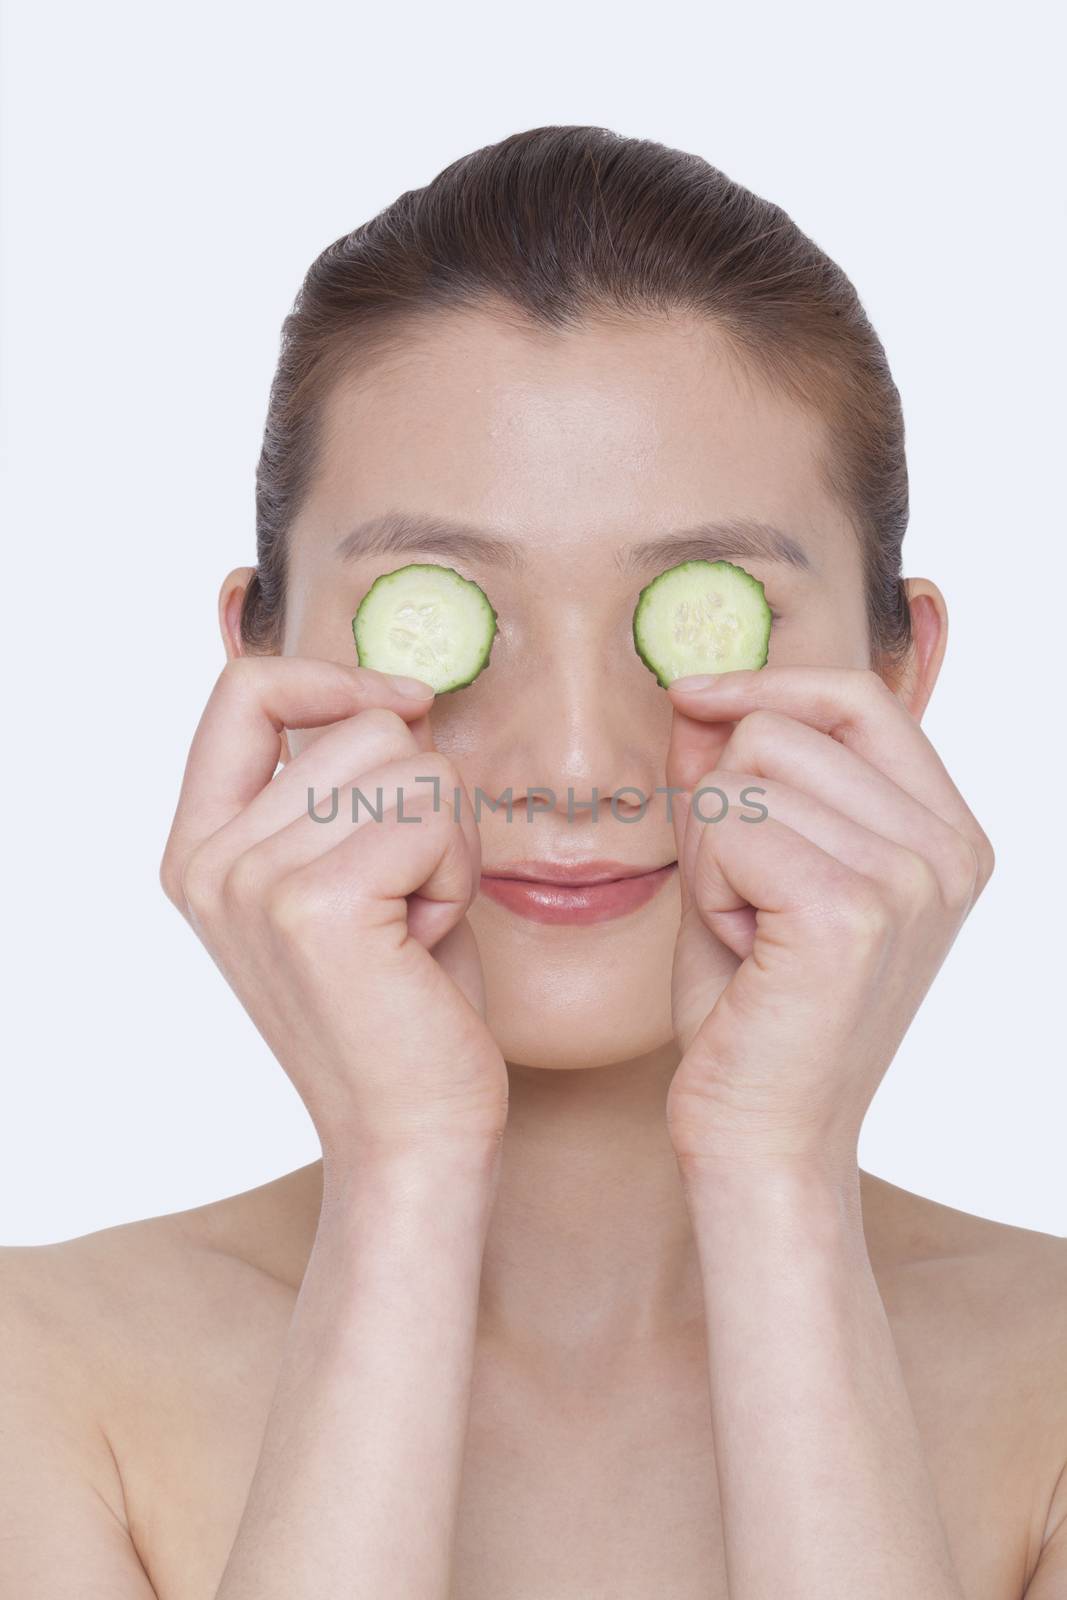 Smiling young shirtless woman holding cucumber slices over her eyes for a beauty treatment, studio shot by XiXinXing